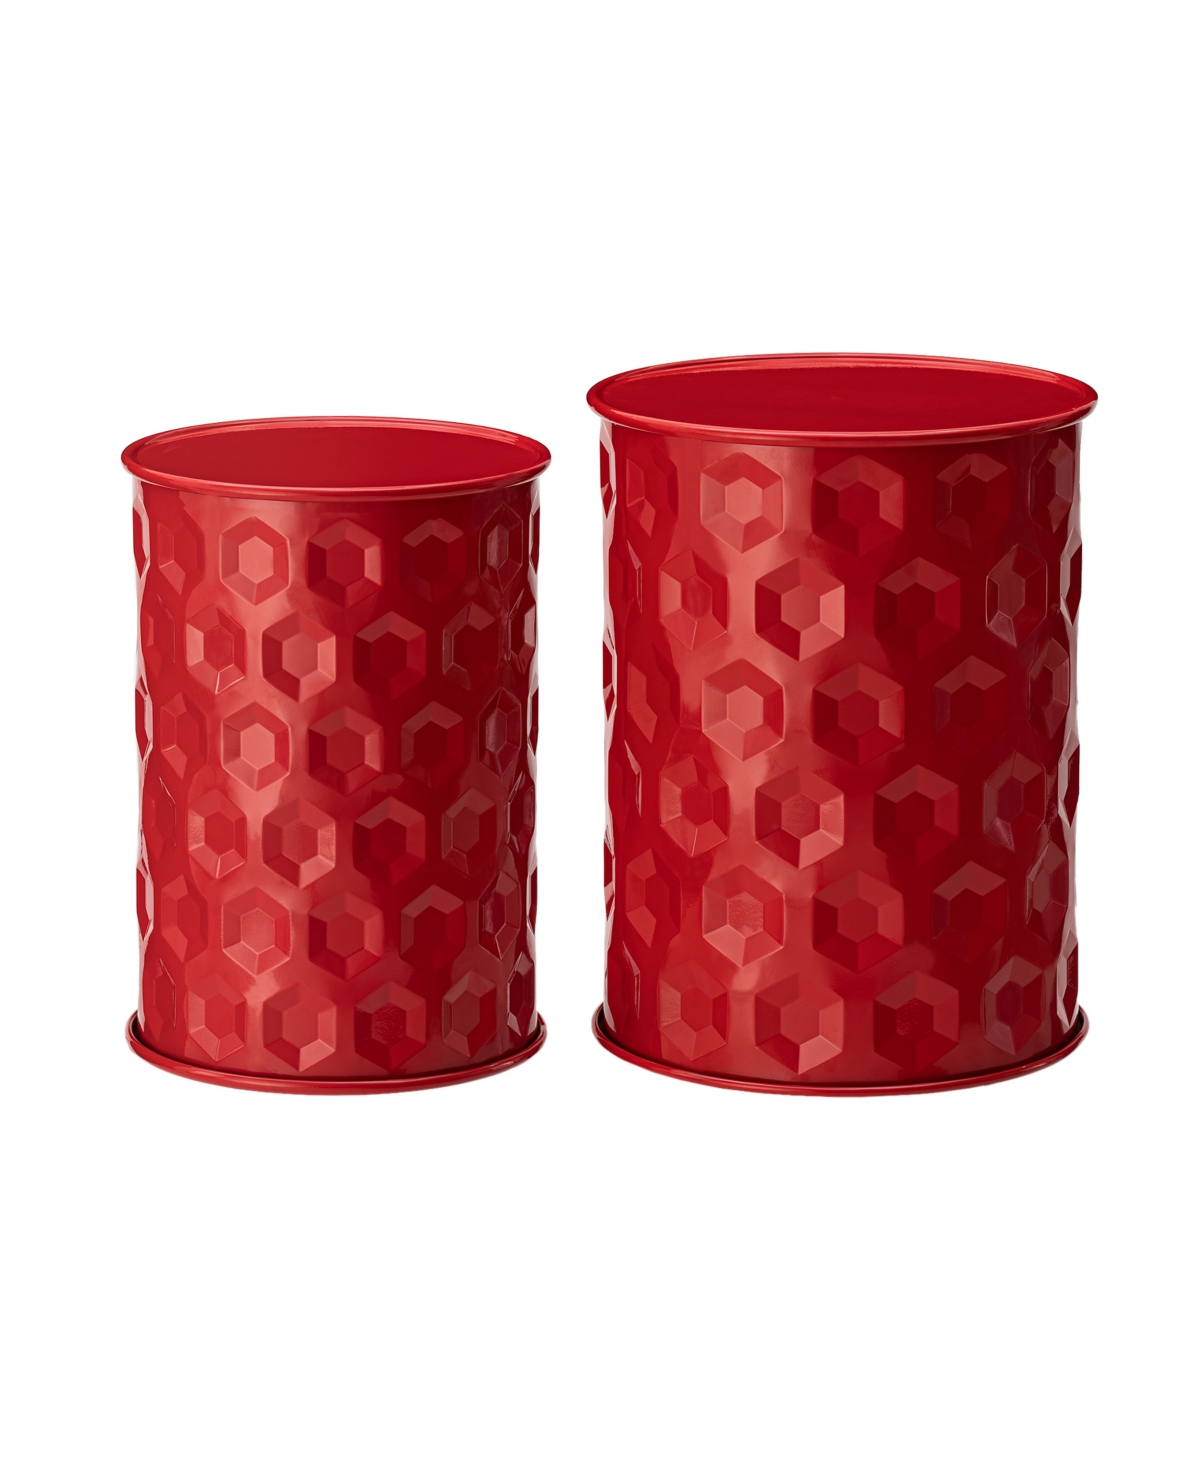 Set of 2 Honeycomb Red Metal Garden Stool or Planter Stand - Red